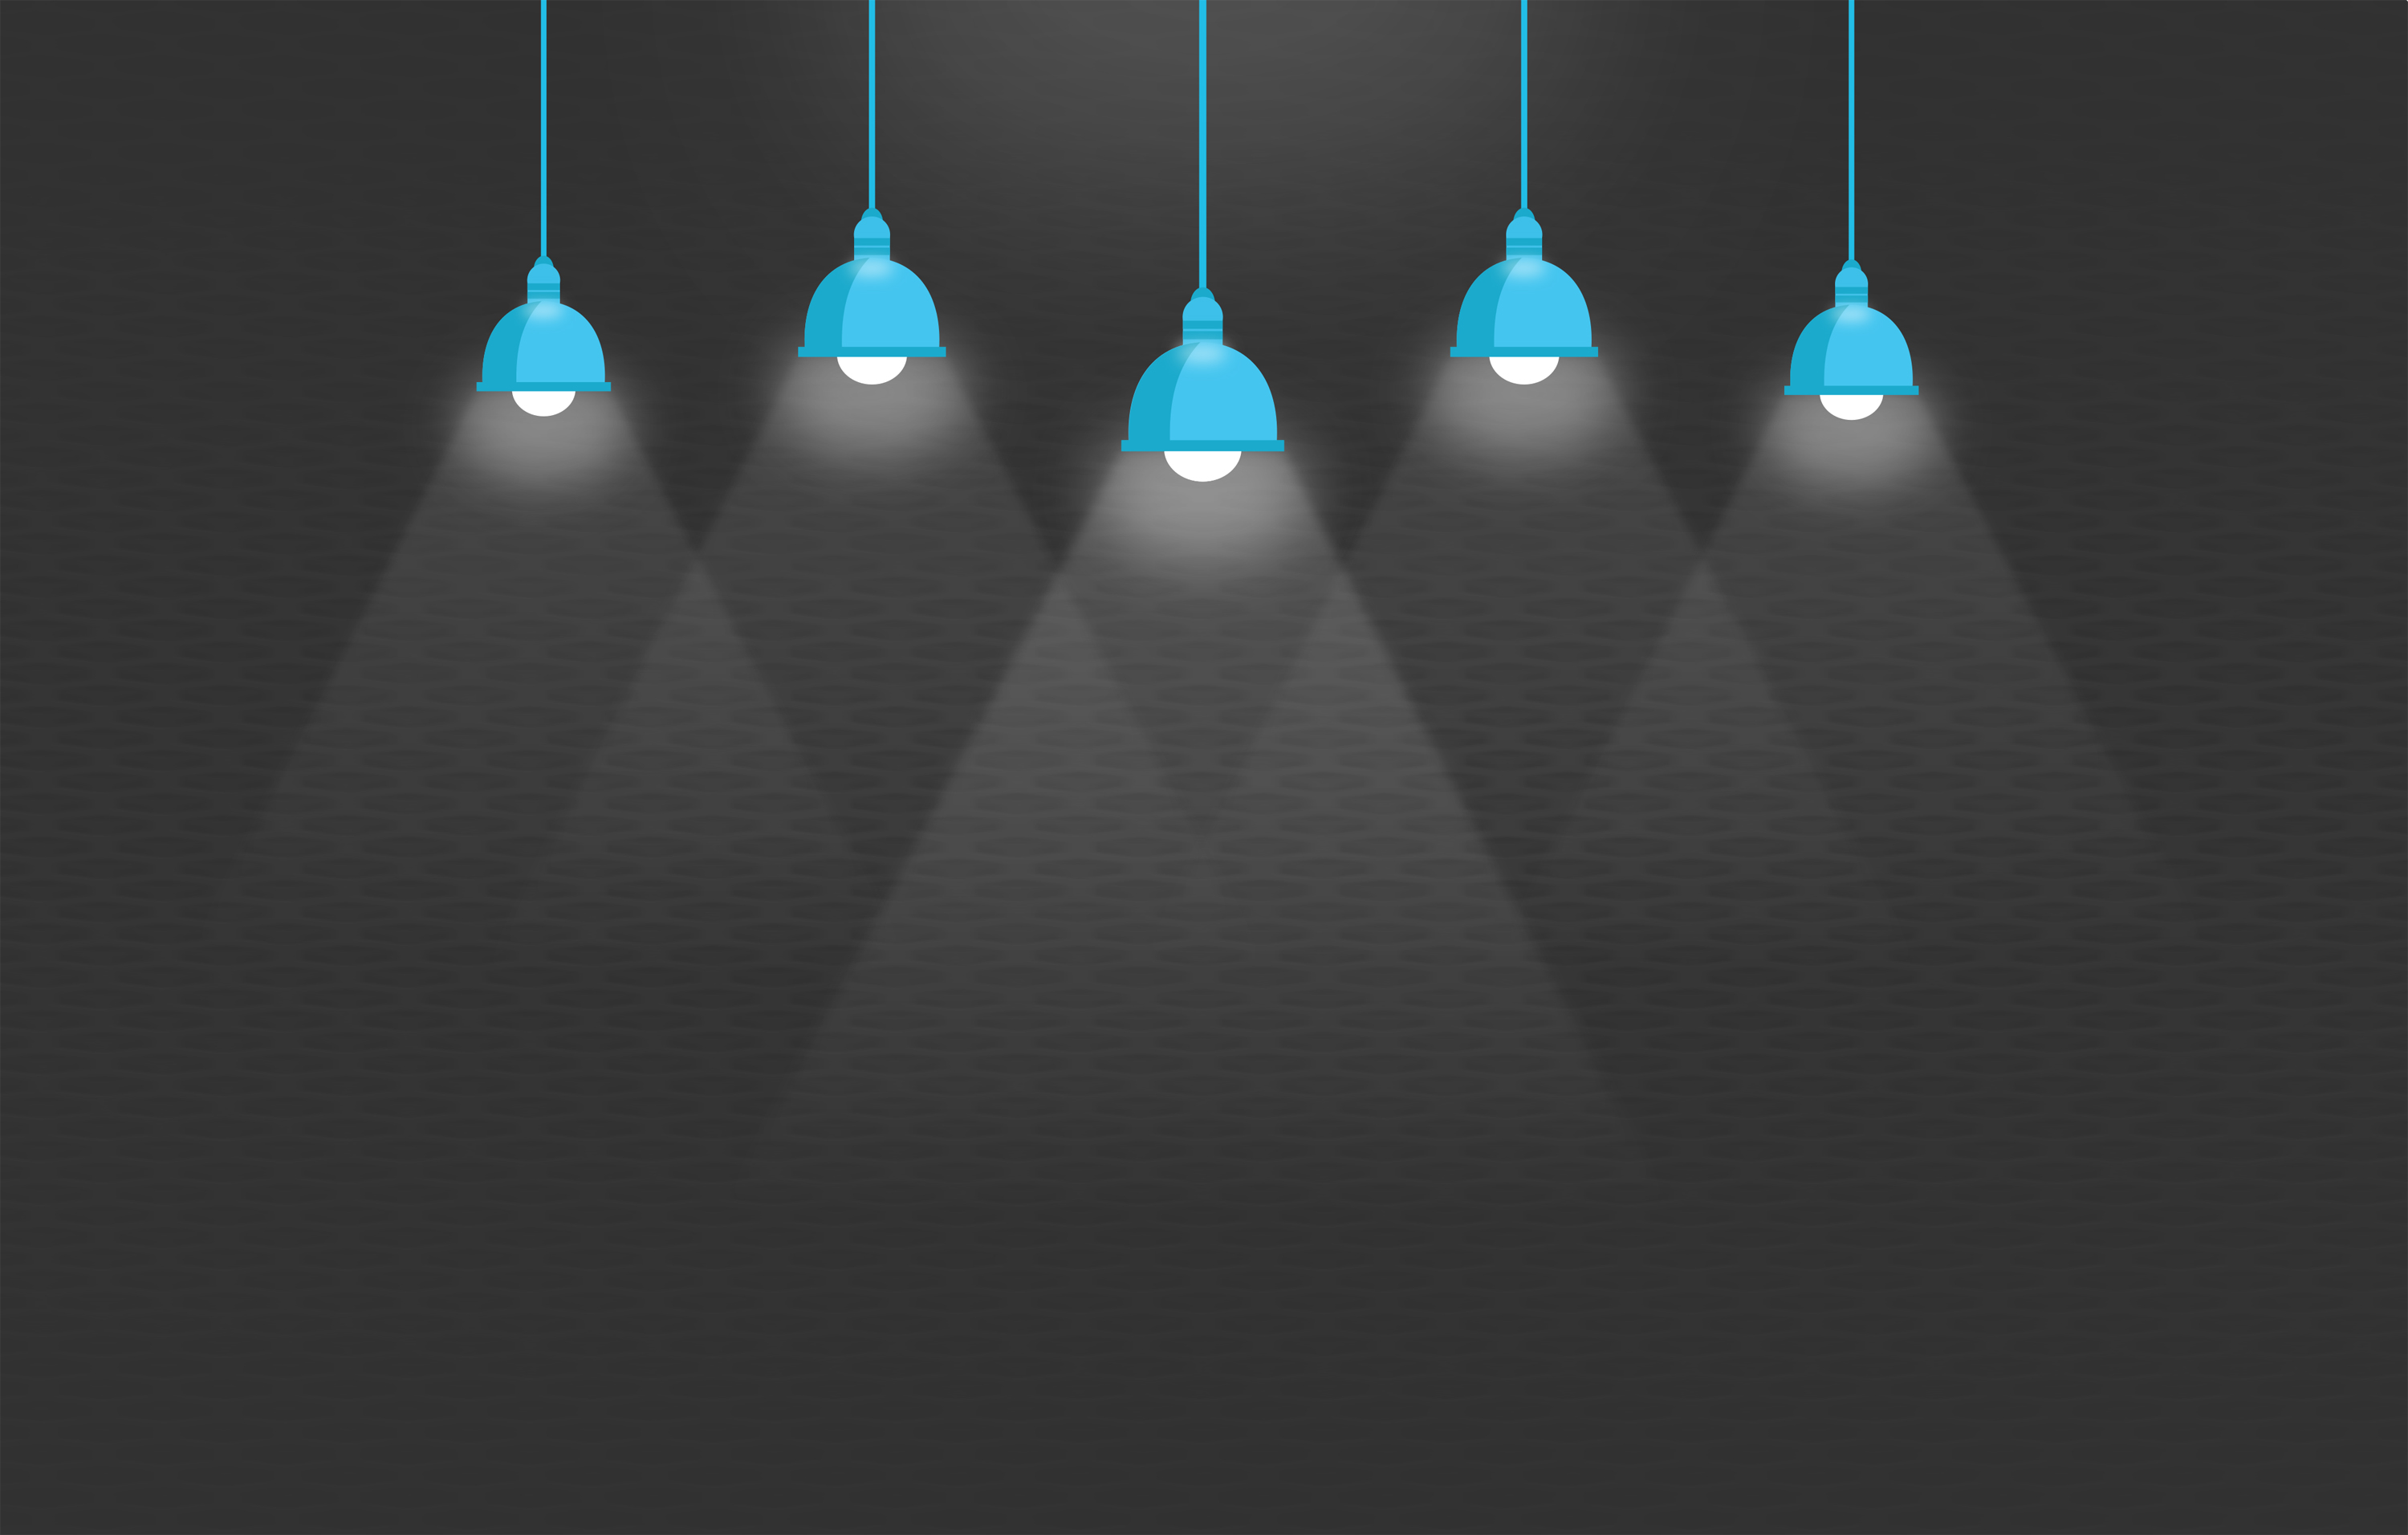 Ceiling lights - illustration with copyspace photo